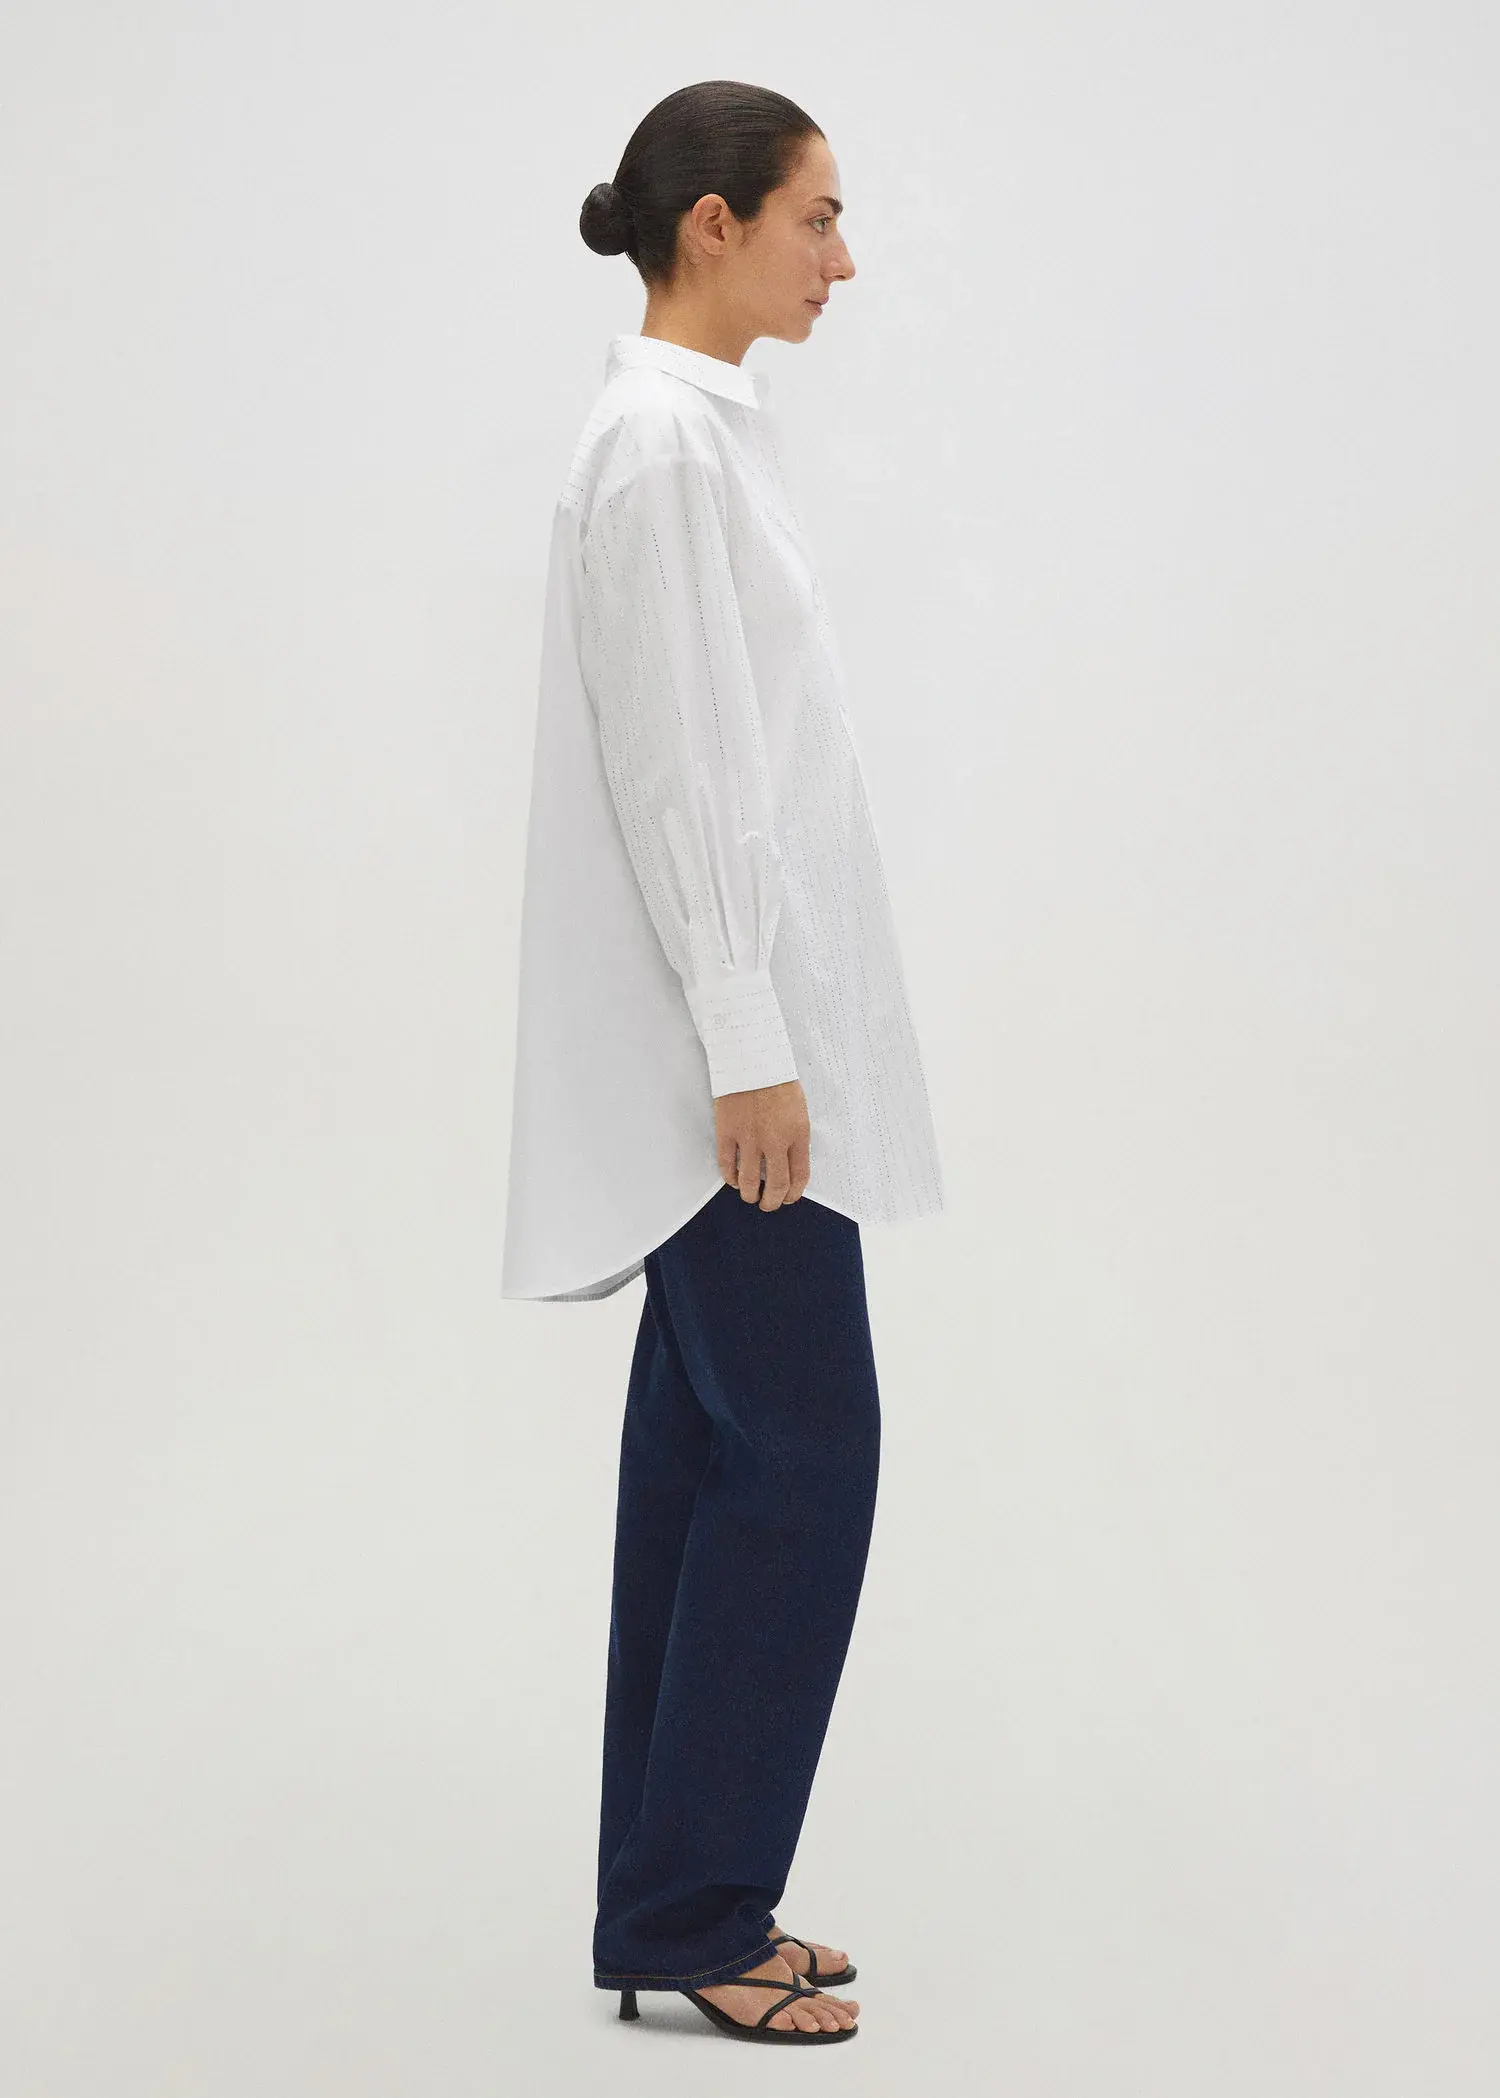 Mango Poplin strass shirt. a person standing in front of a white wall. 